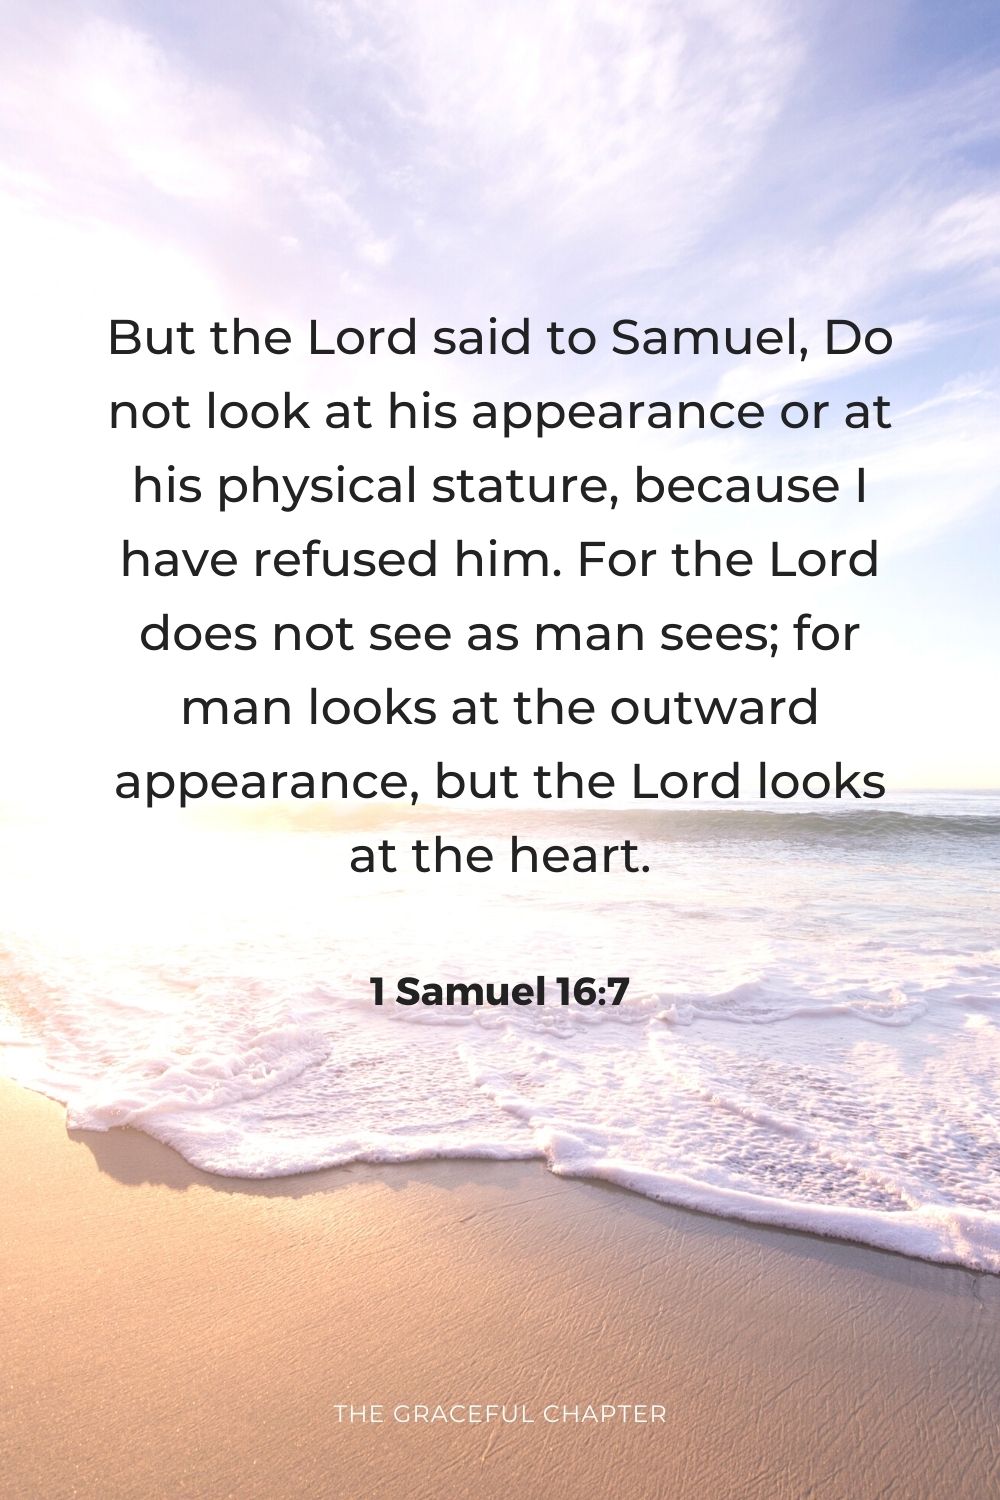 But the Lord said to Samuel, “Do not look at his appearance or at his physical stature, because I have refused him. For the Lord does not see as man sees; for man looks at the outward appearance, but the Lord looks at the heart.